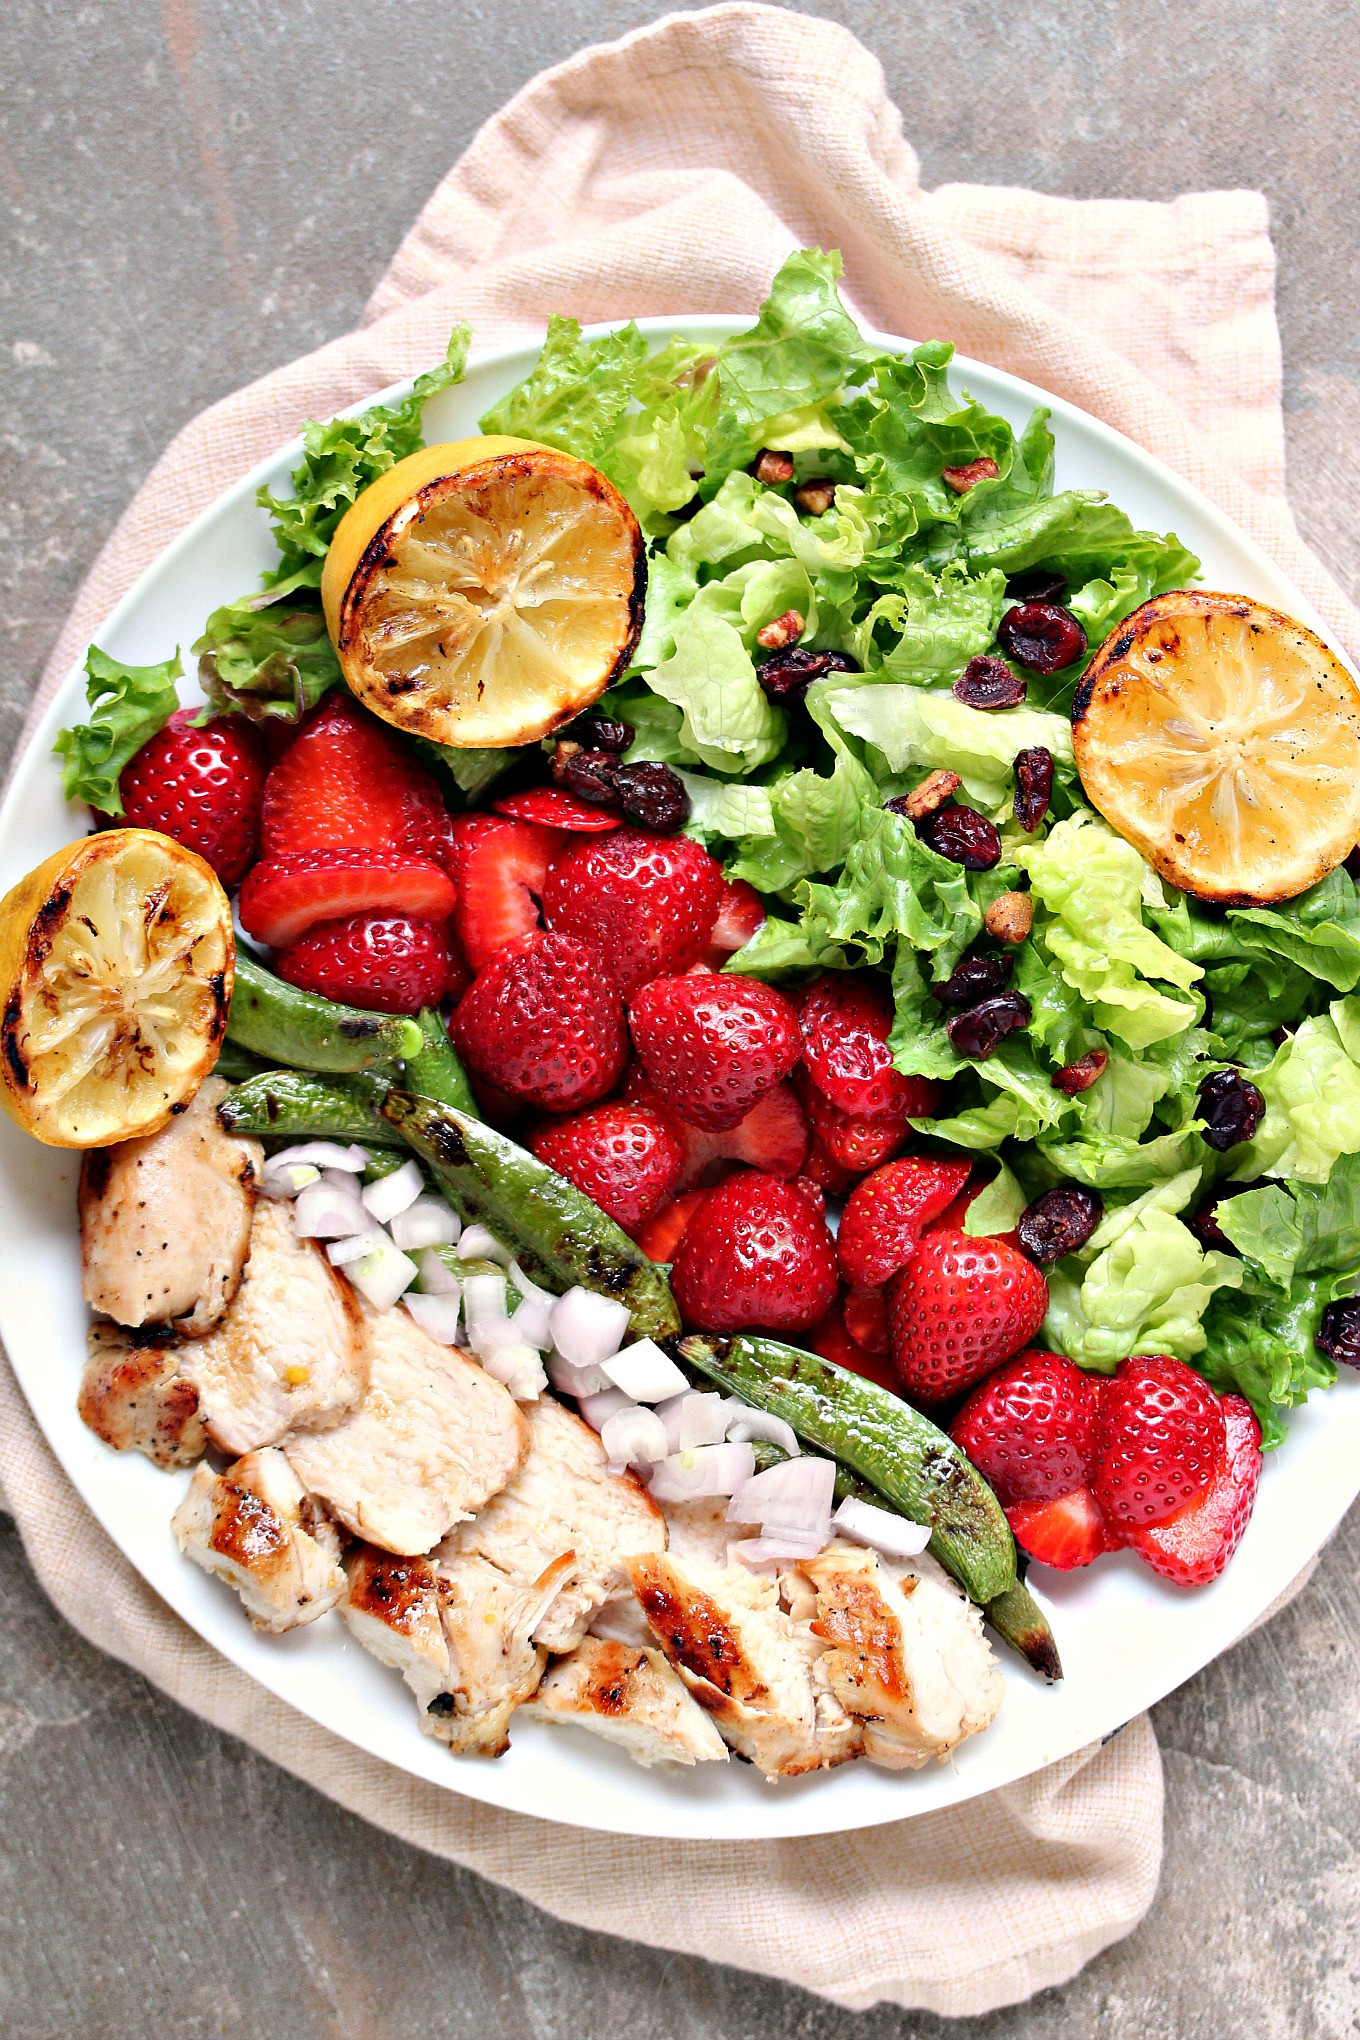 Grilled Chicken For Salad
 Grilled Chicken Salad and Strawberries